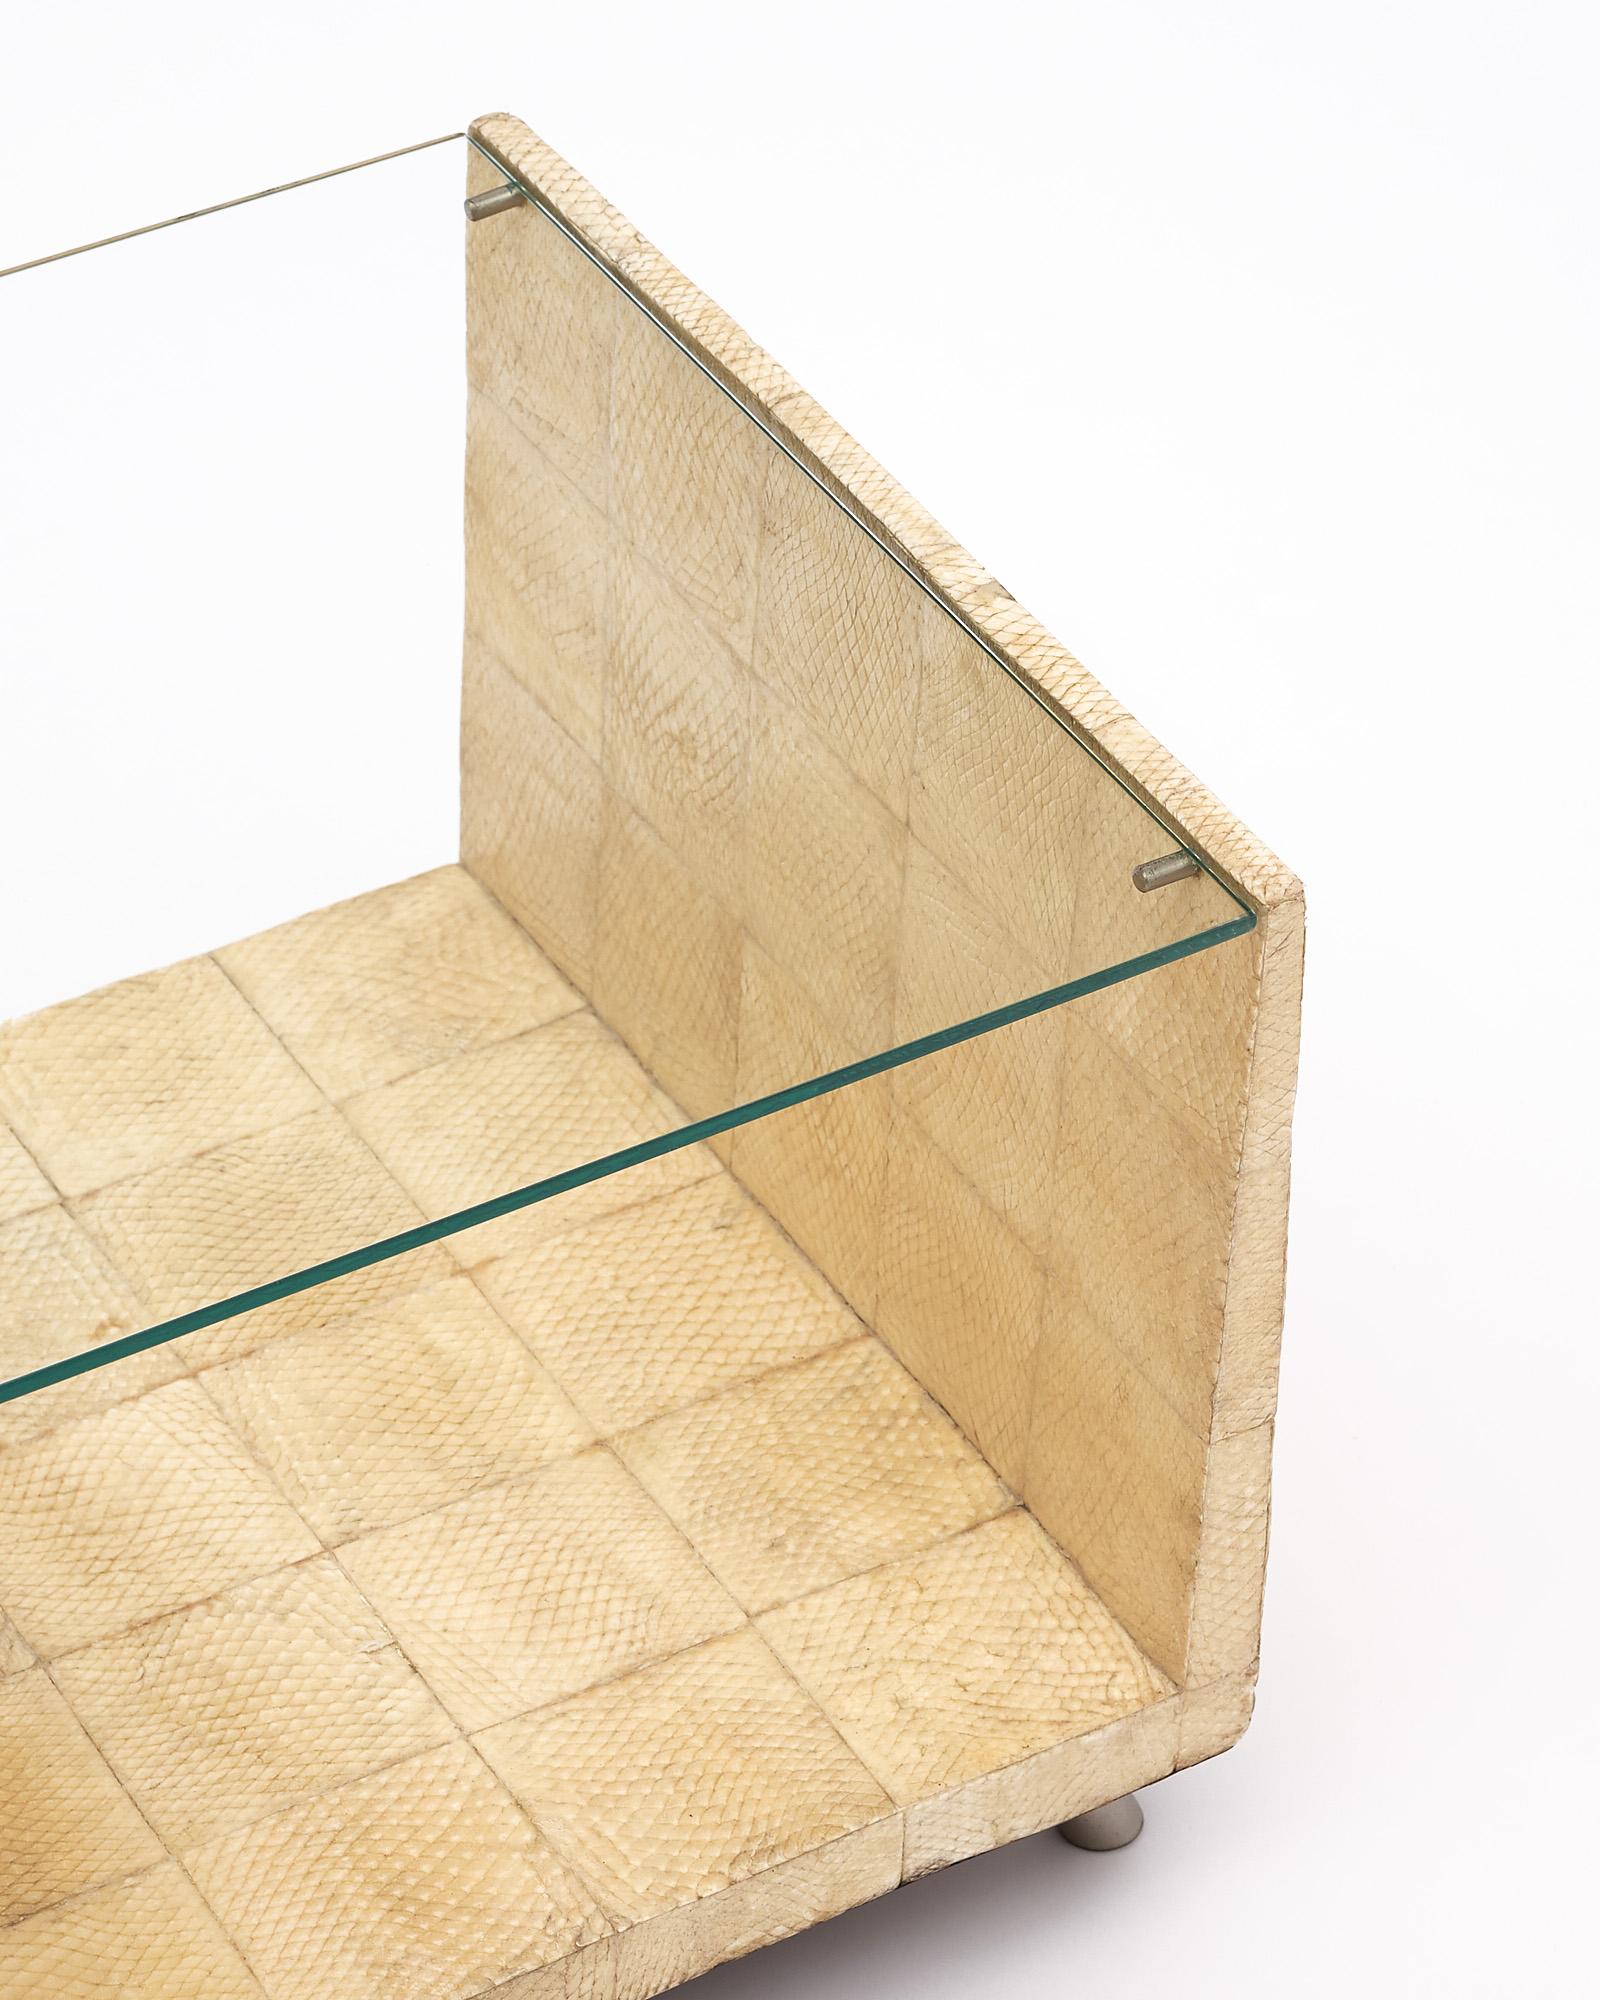 A table by Yuri Augusti designed and executed in Paris, circa 1990. This piece has a wood frame with sharkskin vellum. There is a glass shelf on top.